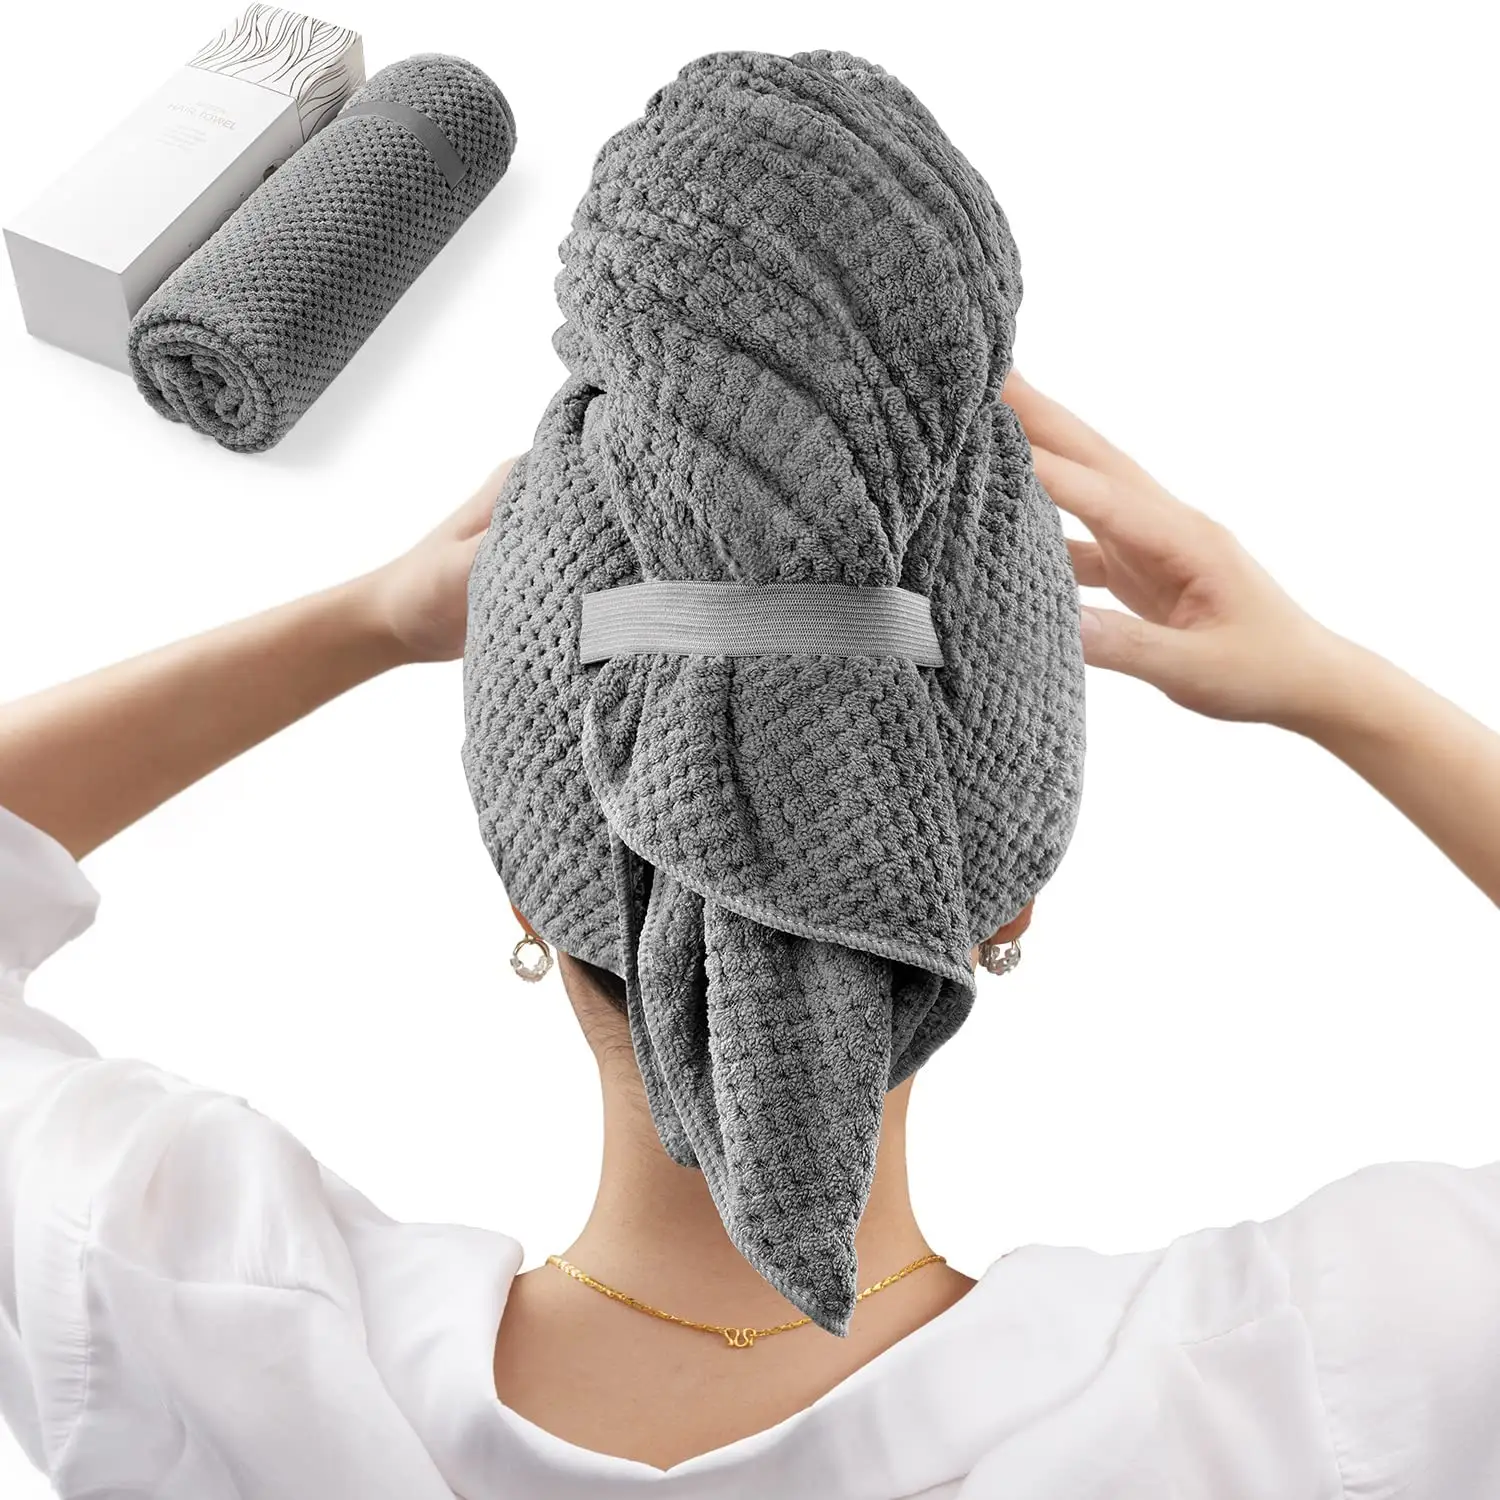 Large Microfiber Hair Wrap Towel for Women Soft And Comfortable Hair Drying Towel with Elastic Band